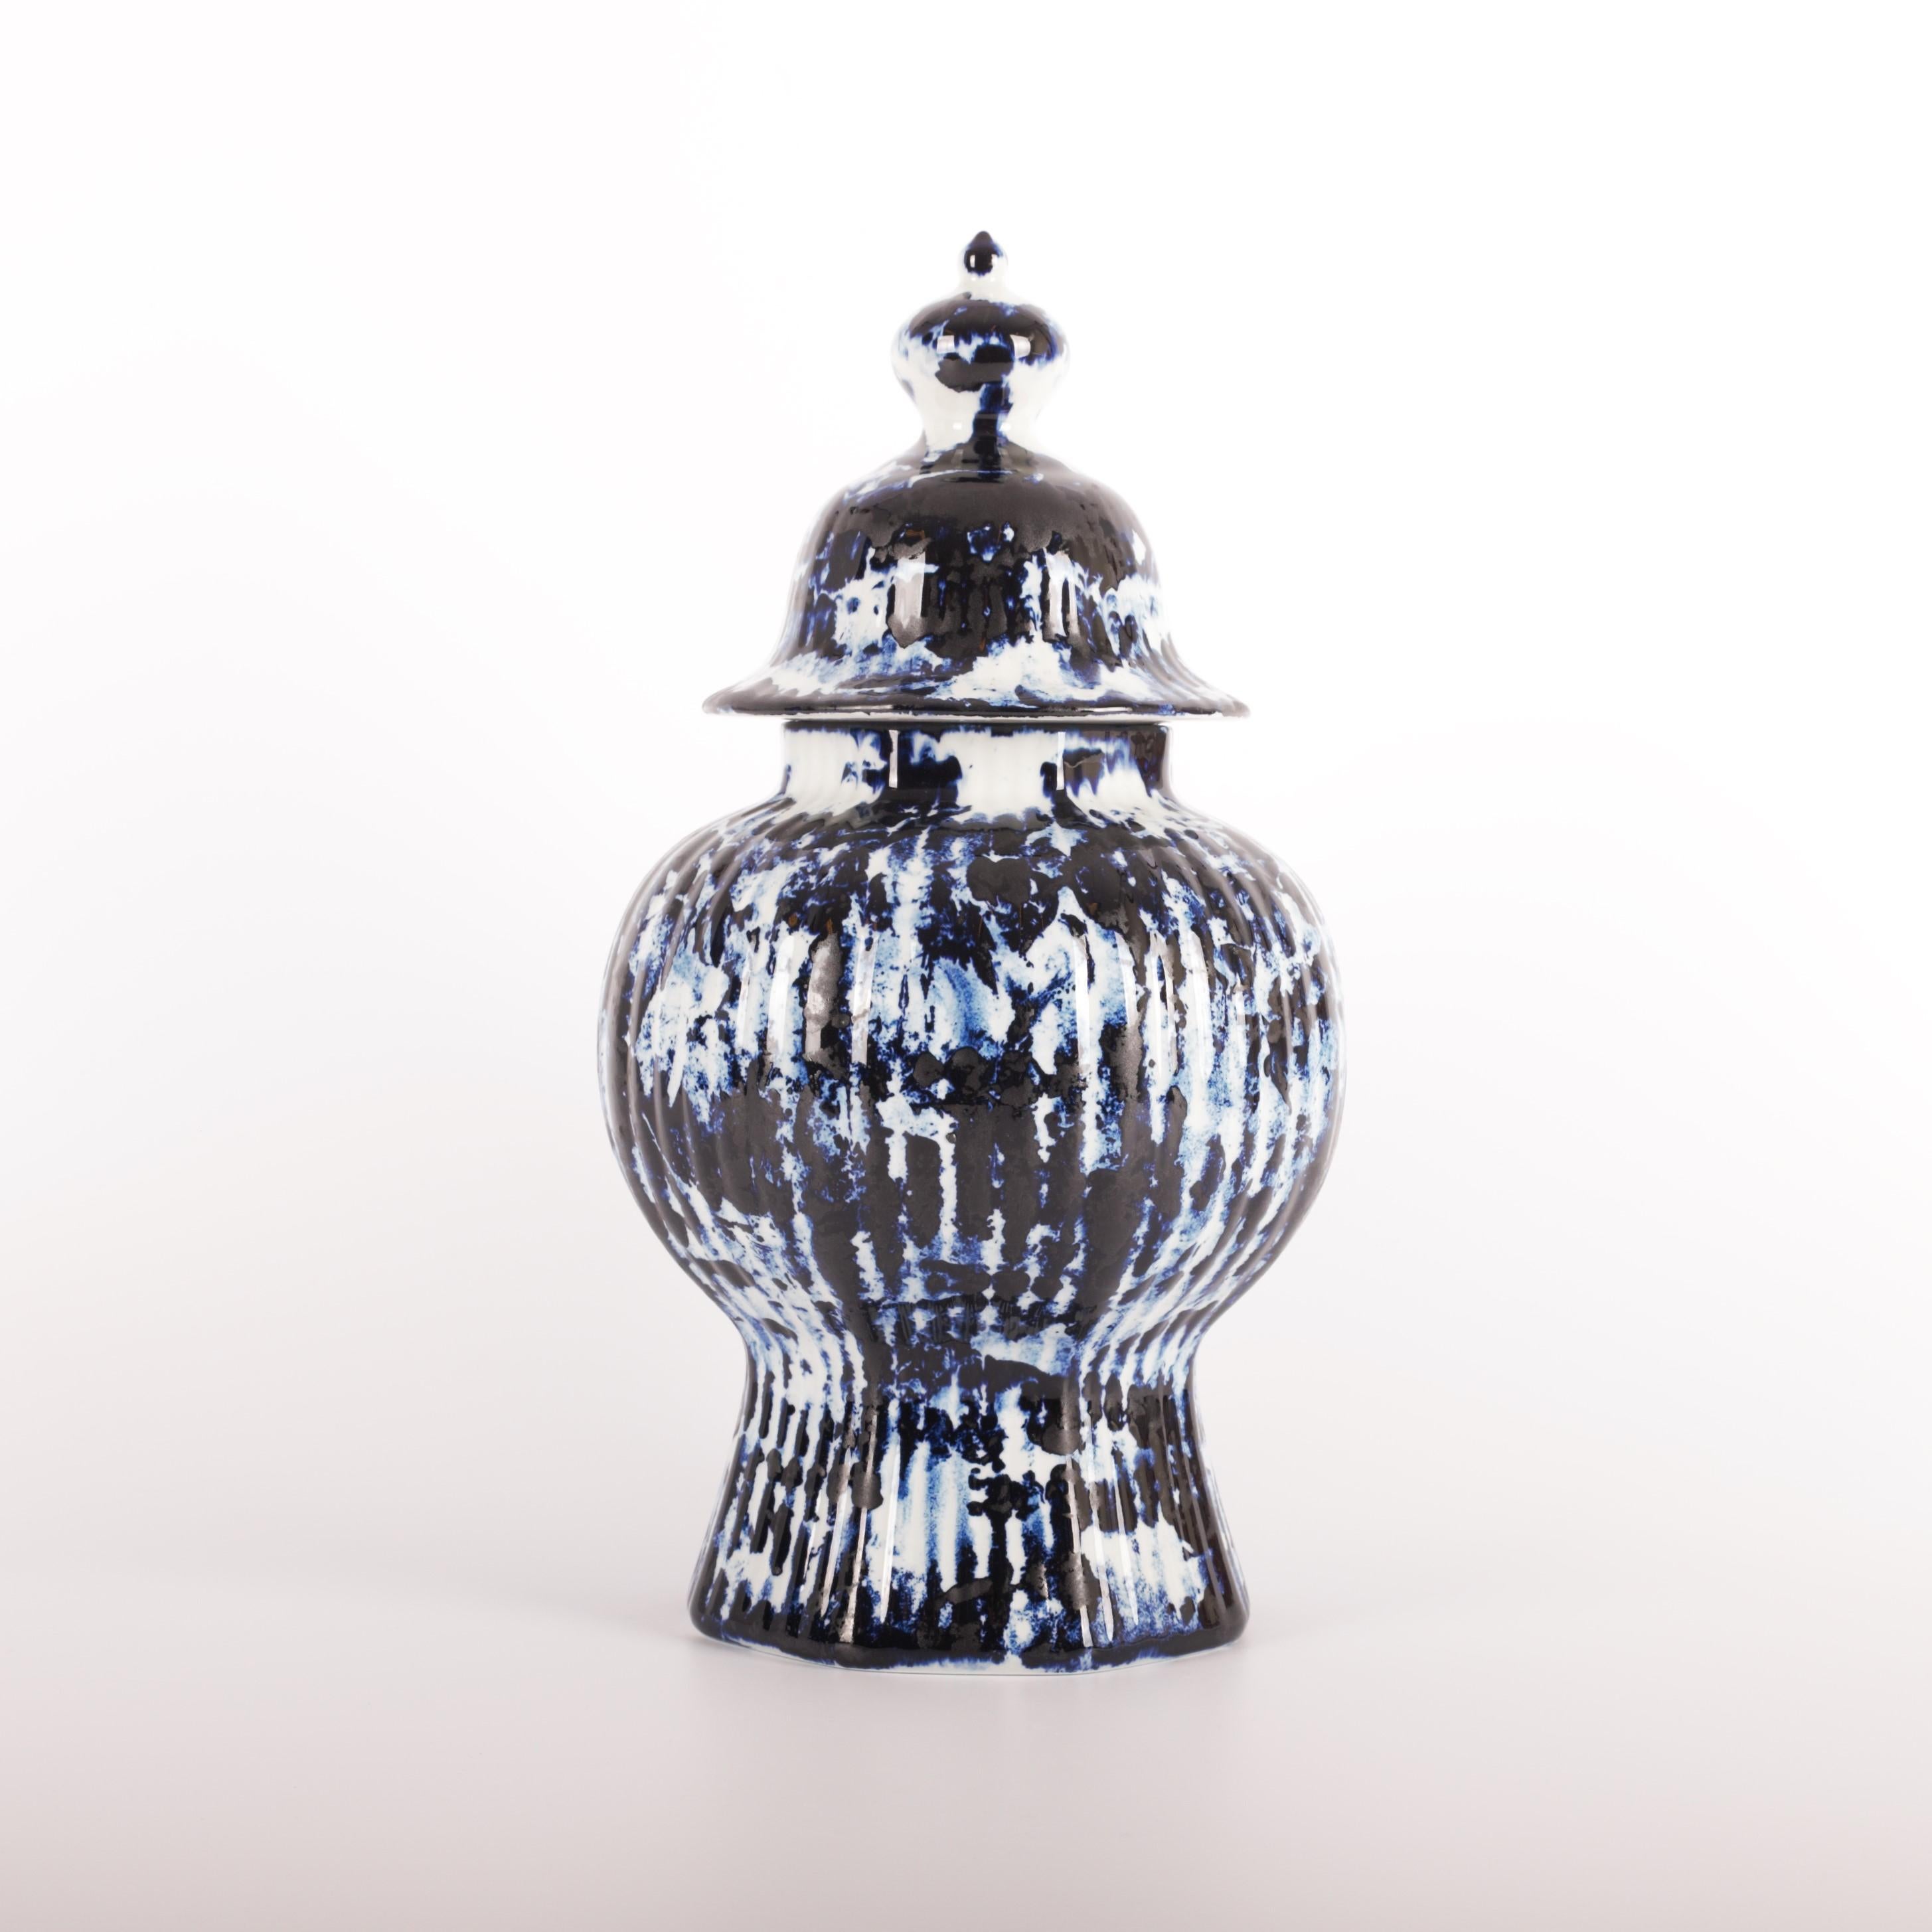 The One Minute Delft Blue Vase with Lid 37cm is available as an exclusive Personal Edition, Marcel Wanders' label carrying works of a more personal and experimental nature. The pieces of the Delft Blue series are unlimited unique by Marcel's one